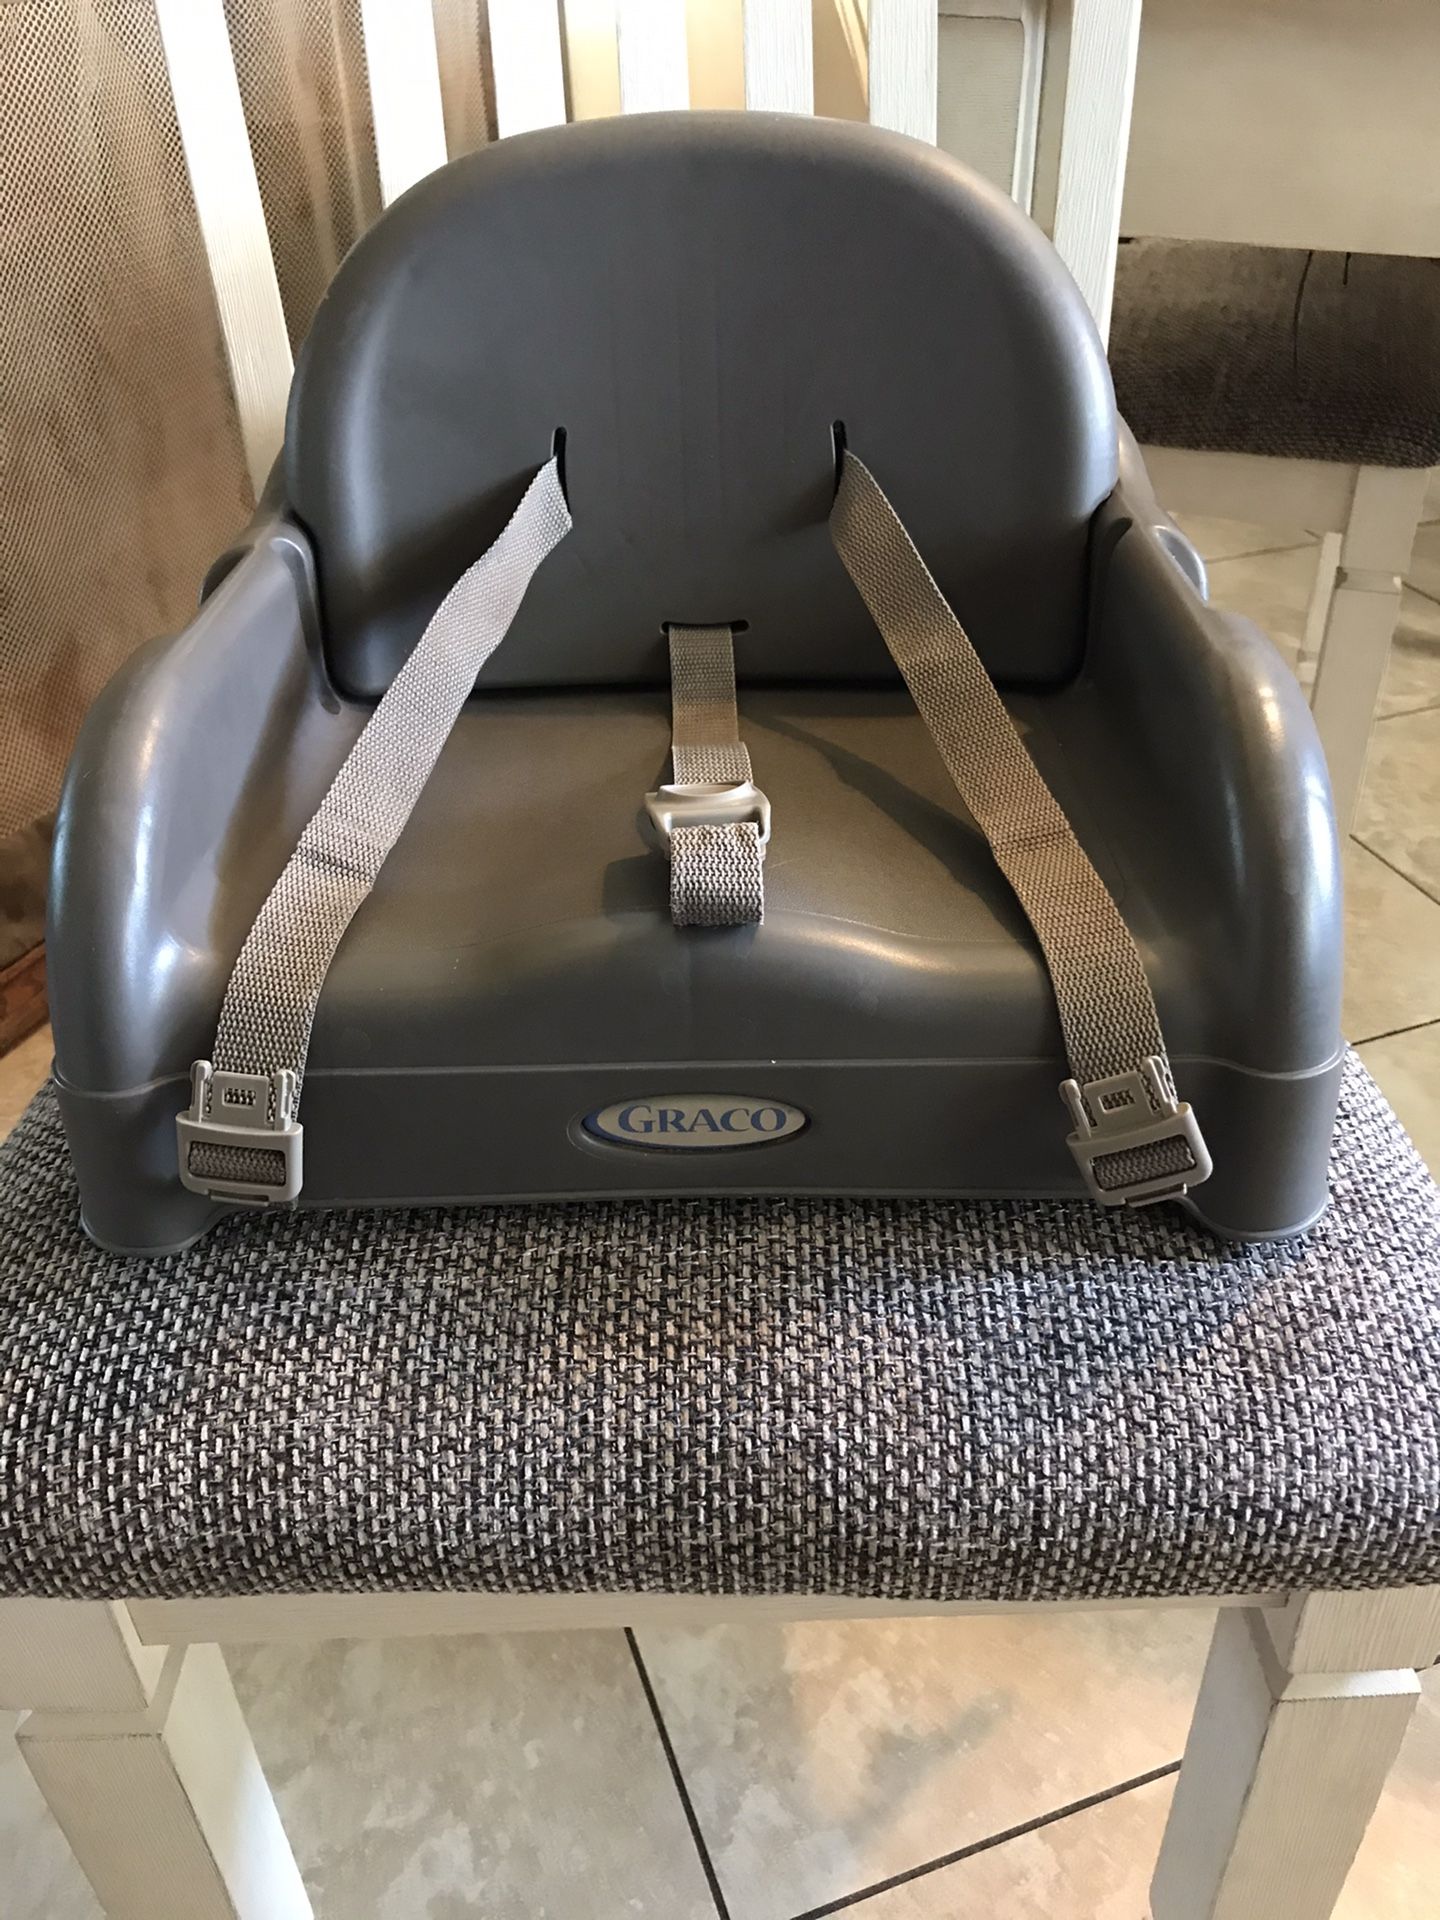 Graco Children’s Booster Seat with adjustable back rest